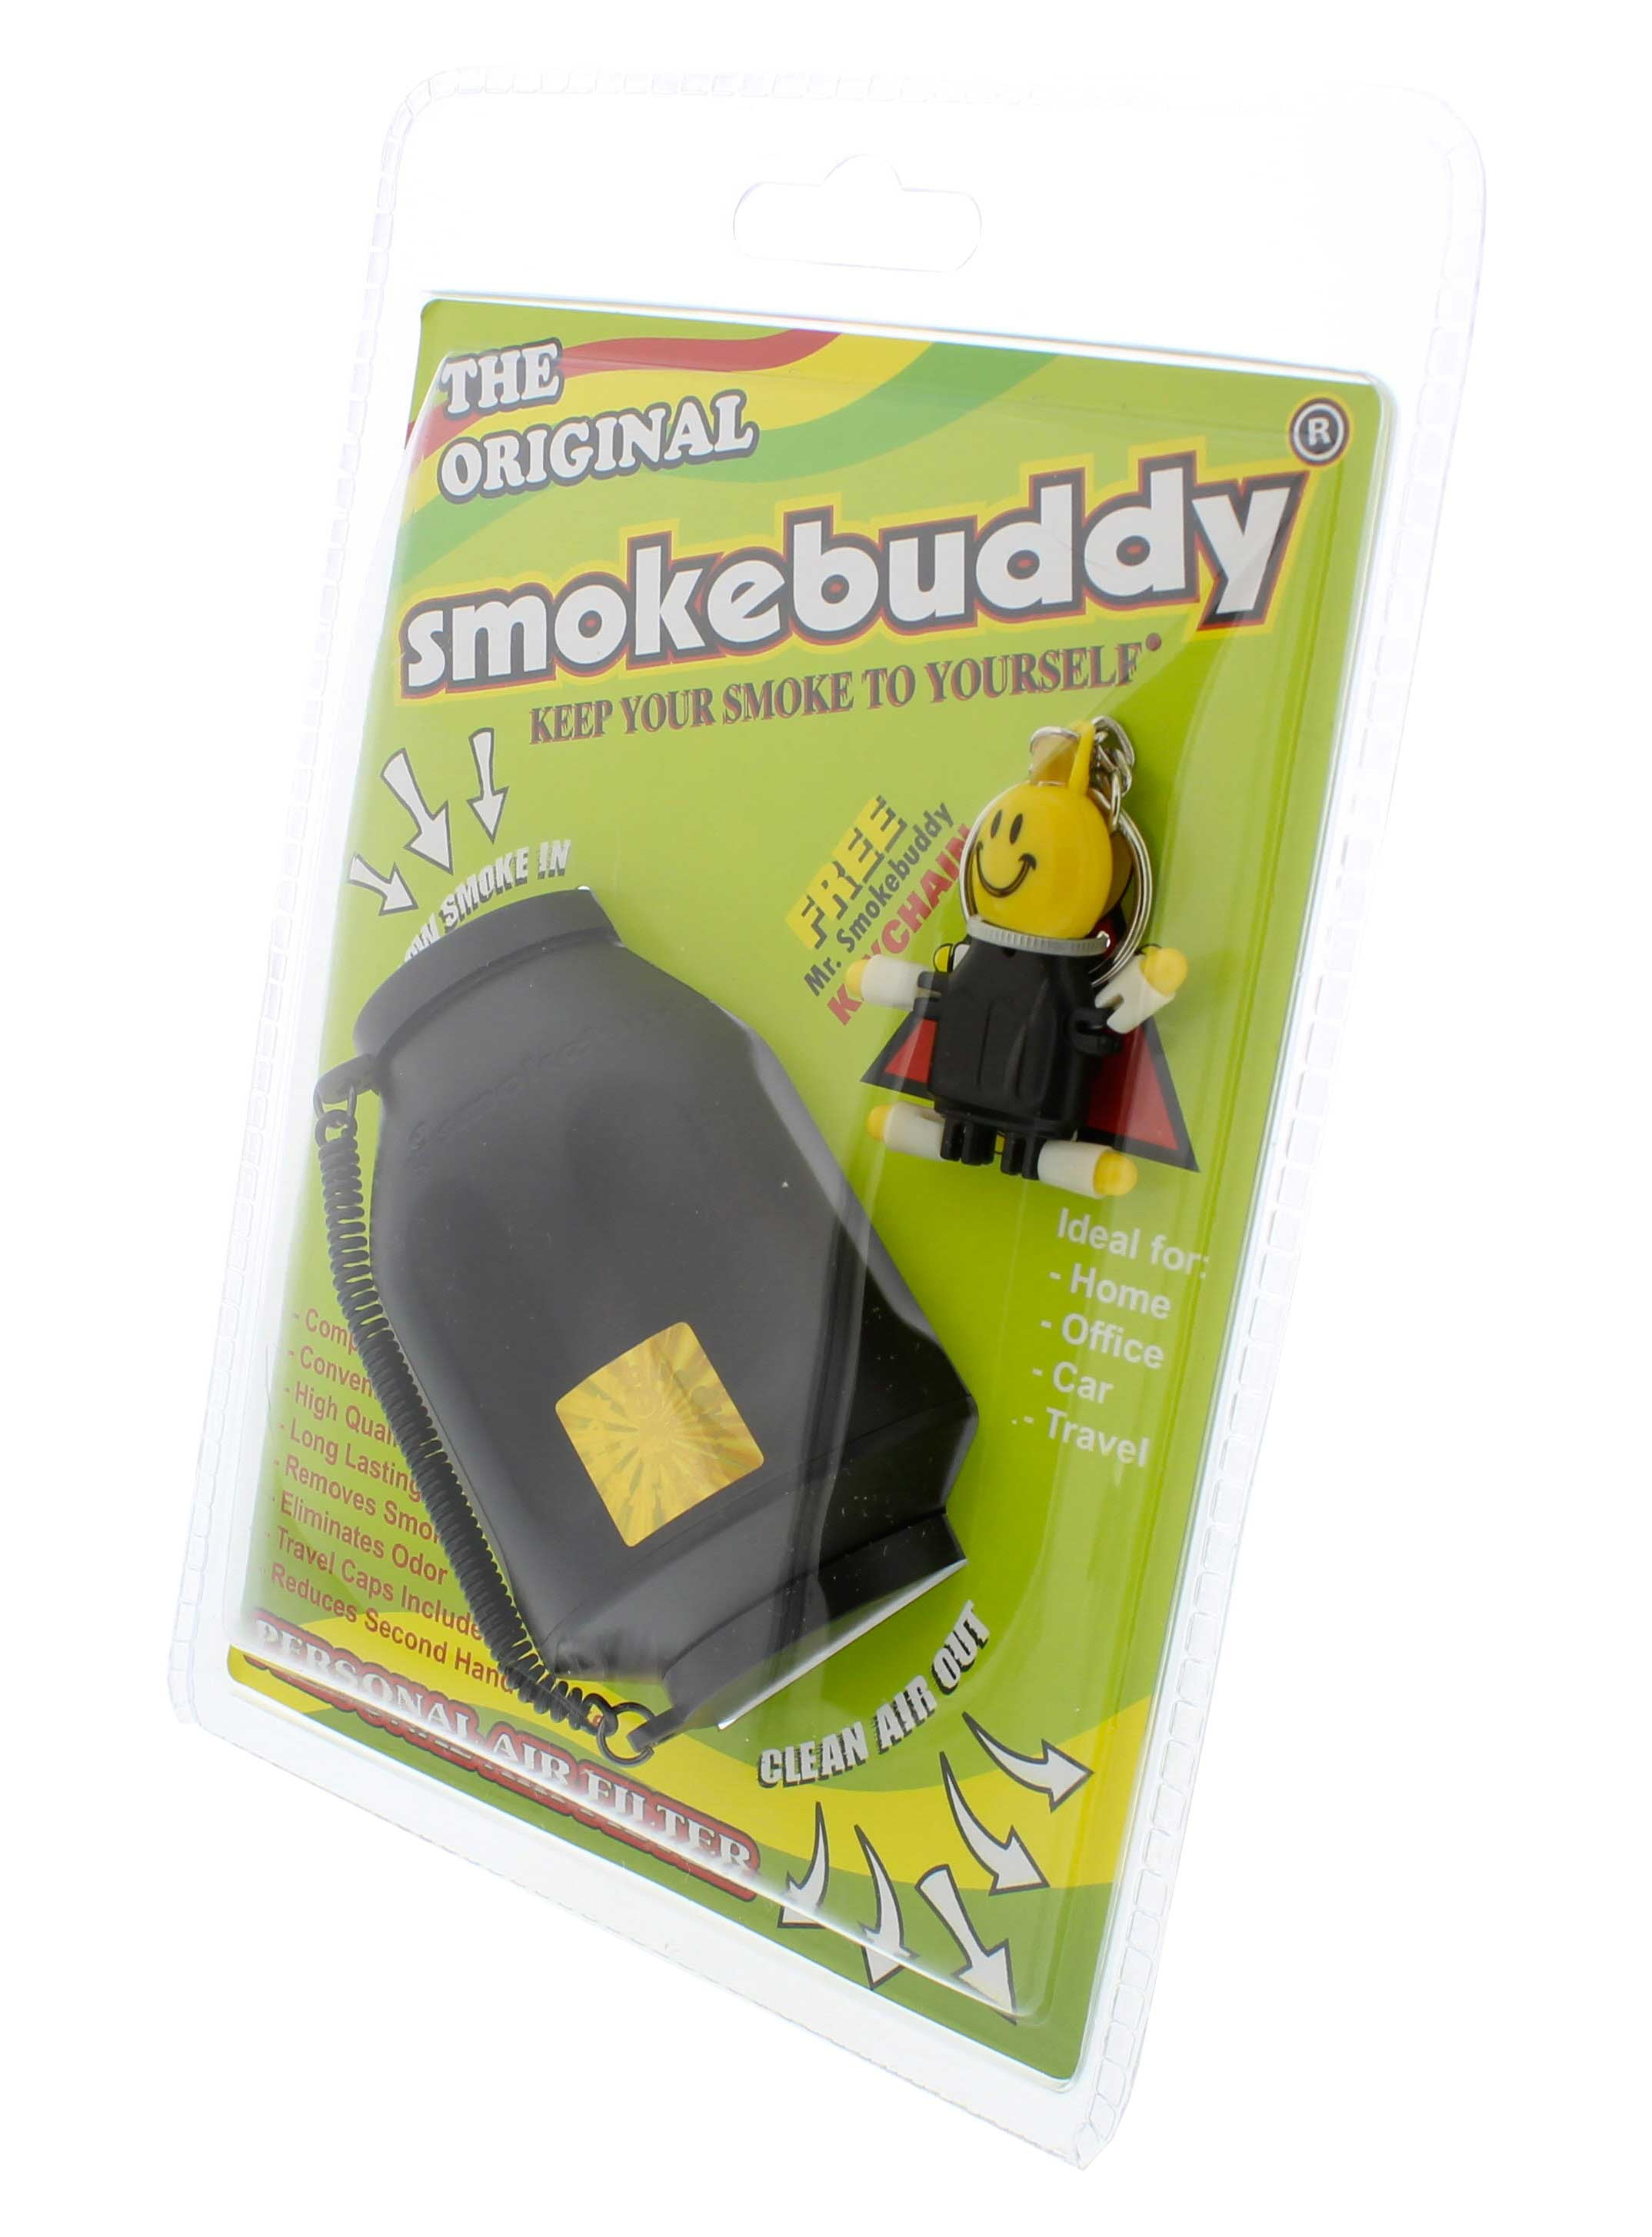 Smoke Buddy Original Personal Air Purifier Cleaner Filter Removes Odor -  Black 